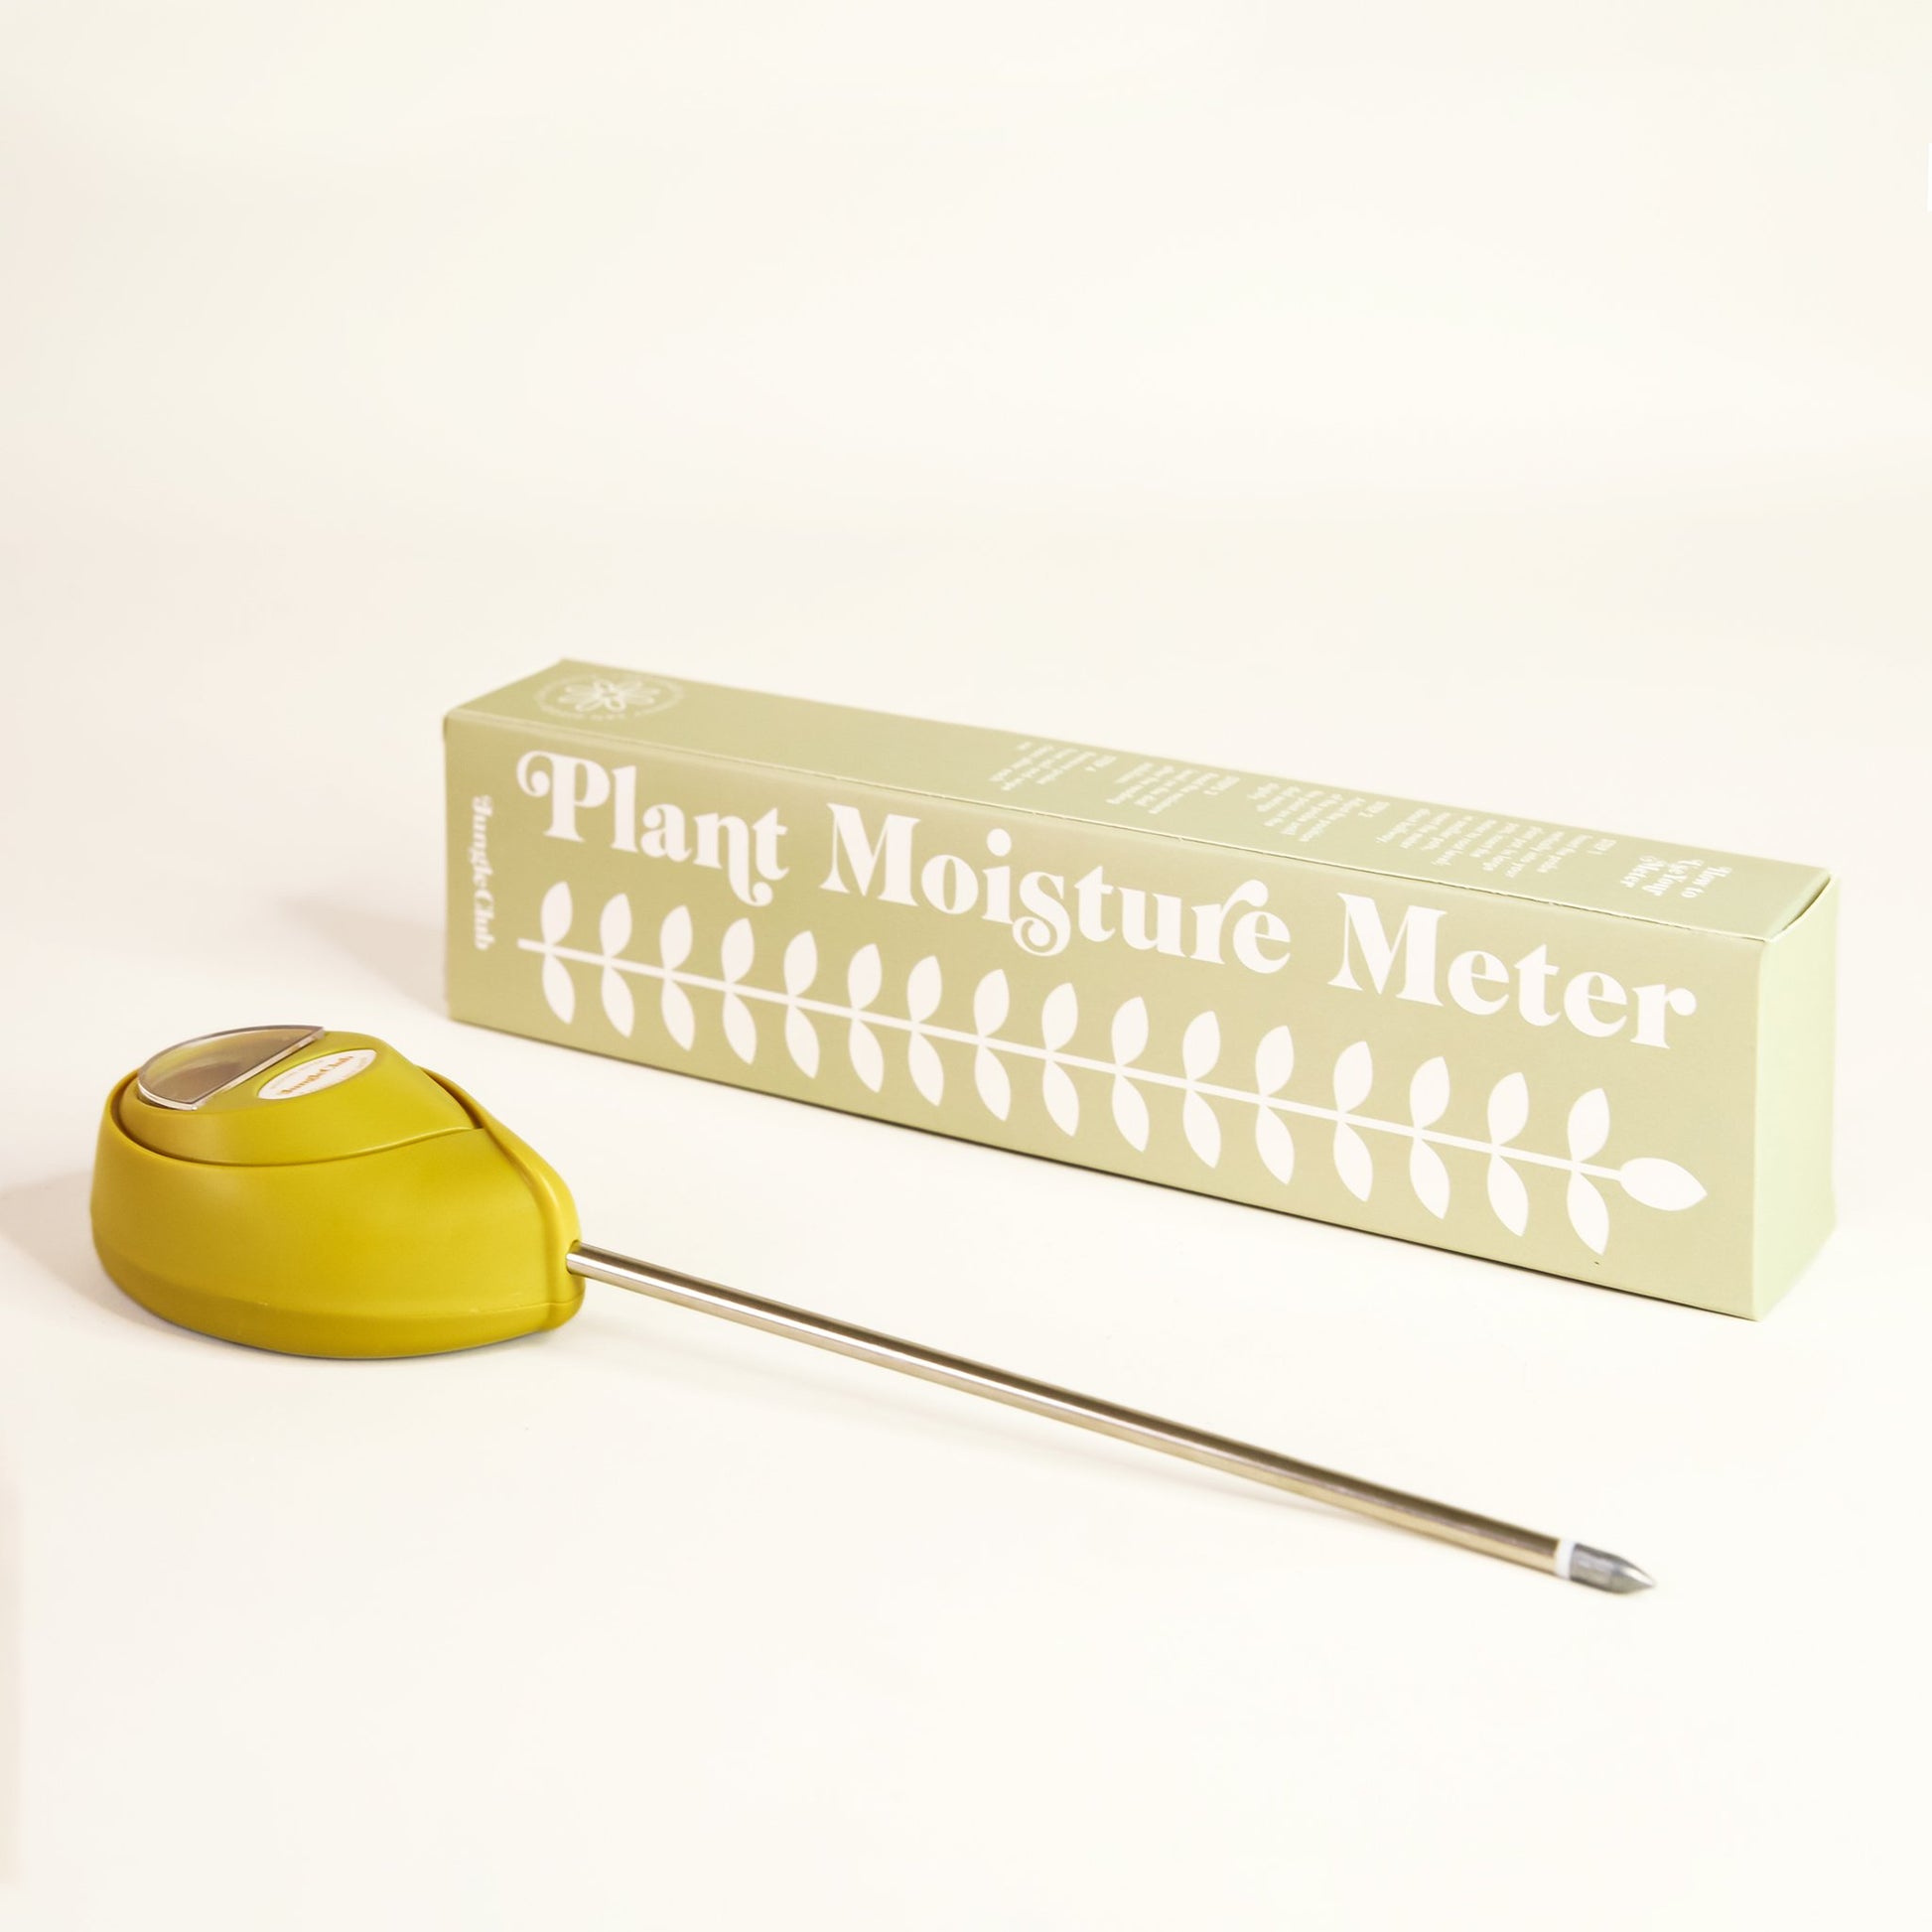 Green moisture meter laying besides packaging that reads 'plant moisture meter' along the side of white leafy design. The moisture meter has an upside down teardrop shape and metal probe running from base. 